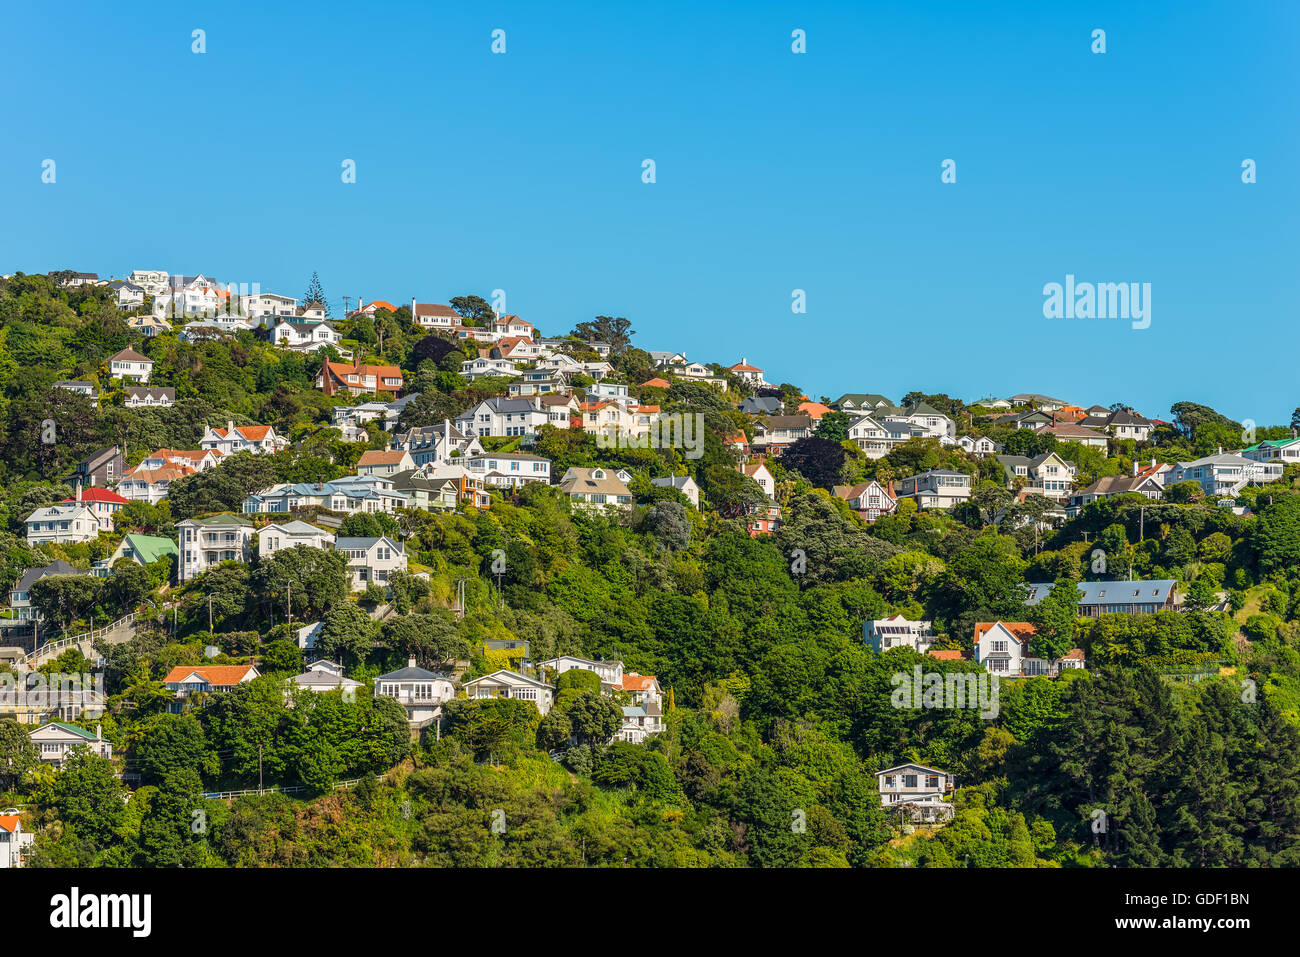 Colorful houses in Wellington, New Zealand. Wellington is the capital city and second most populous urban area of New Zealand. Stock Photo